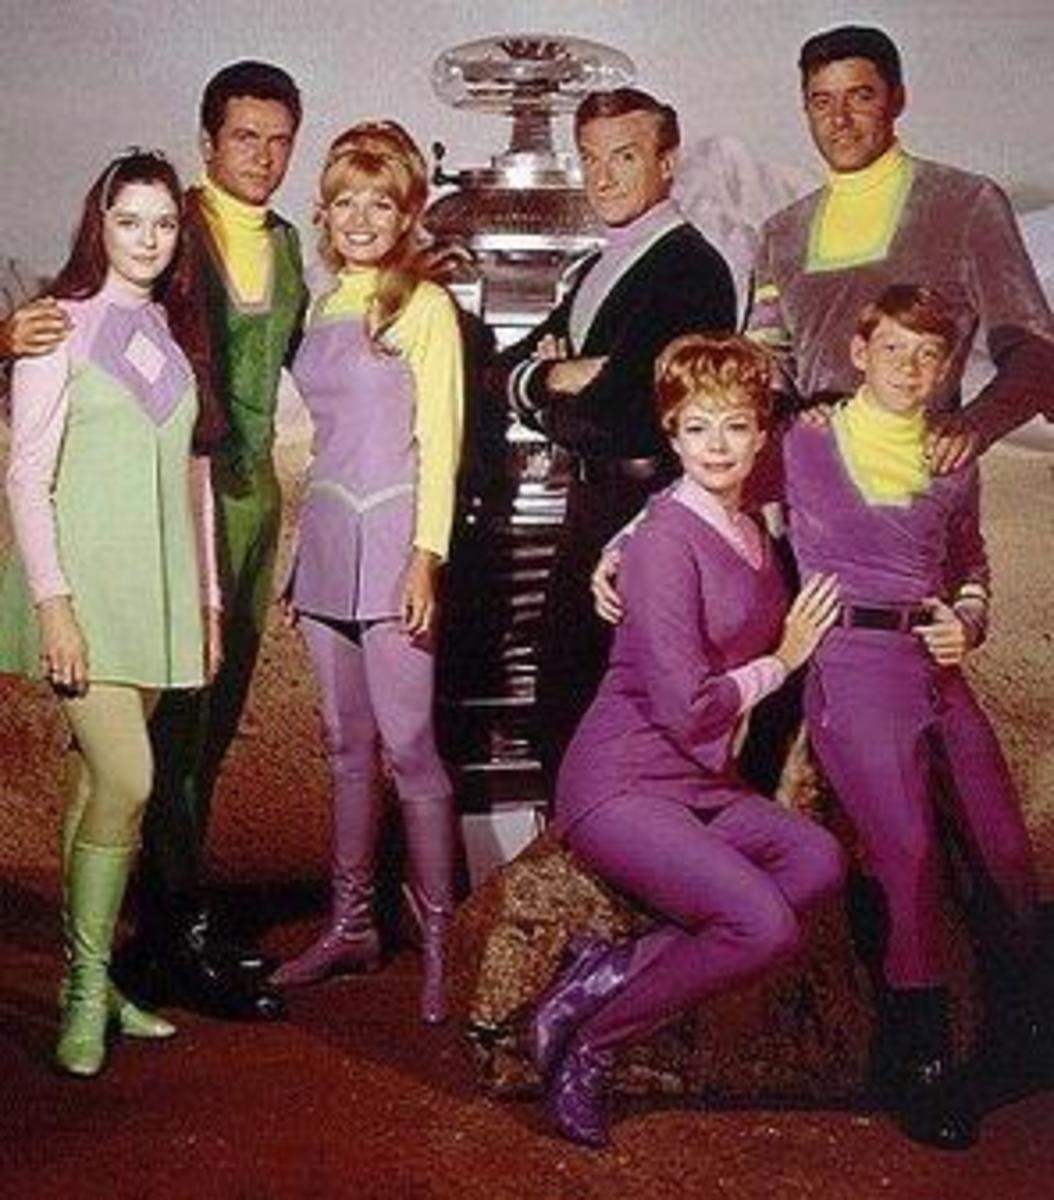 The cast of Lost in Space - 1967.